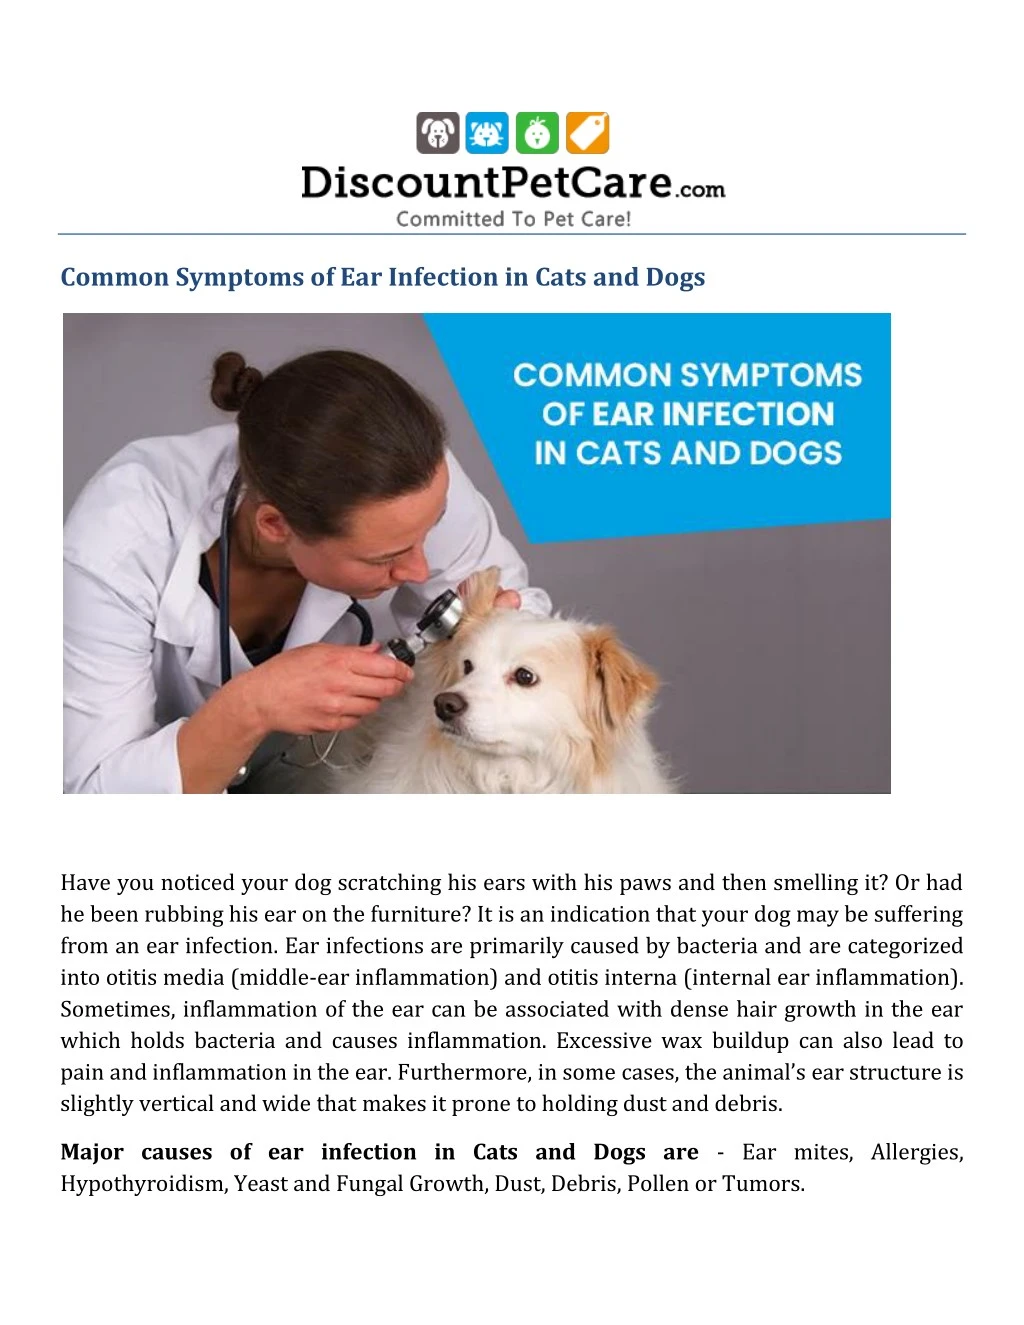 common symptoms of ear infection in cats and dogs